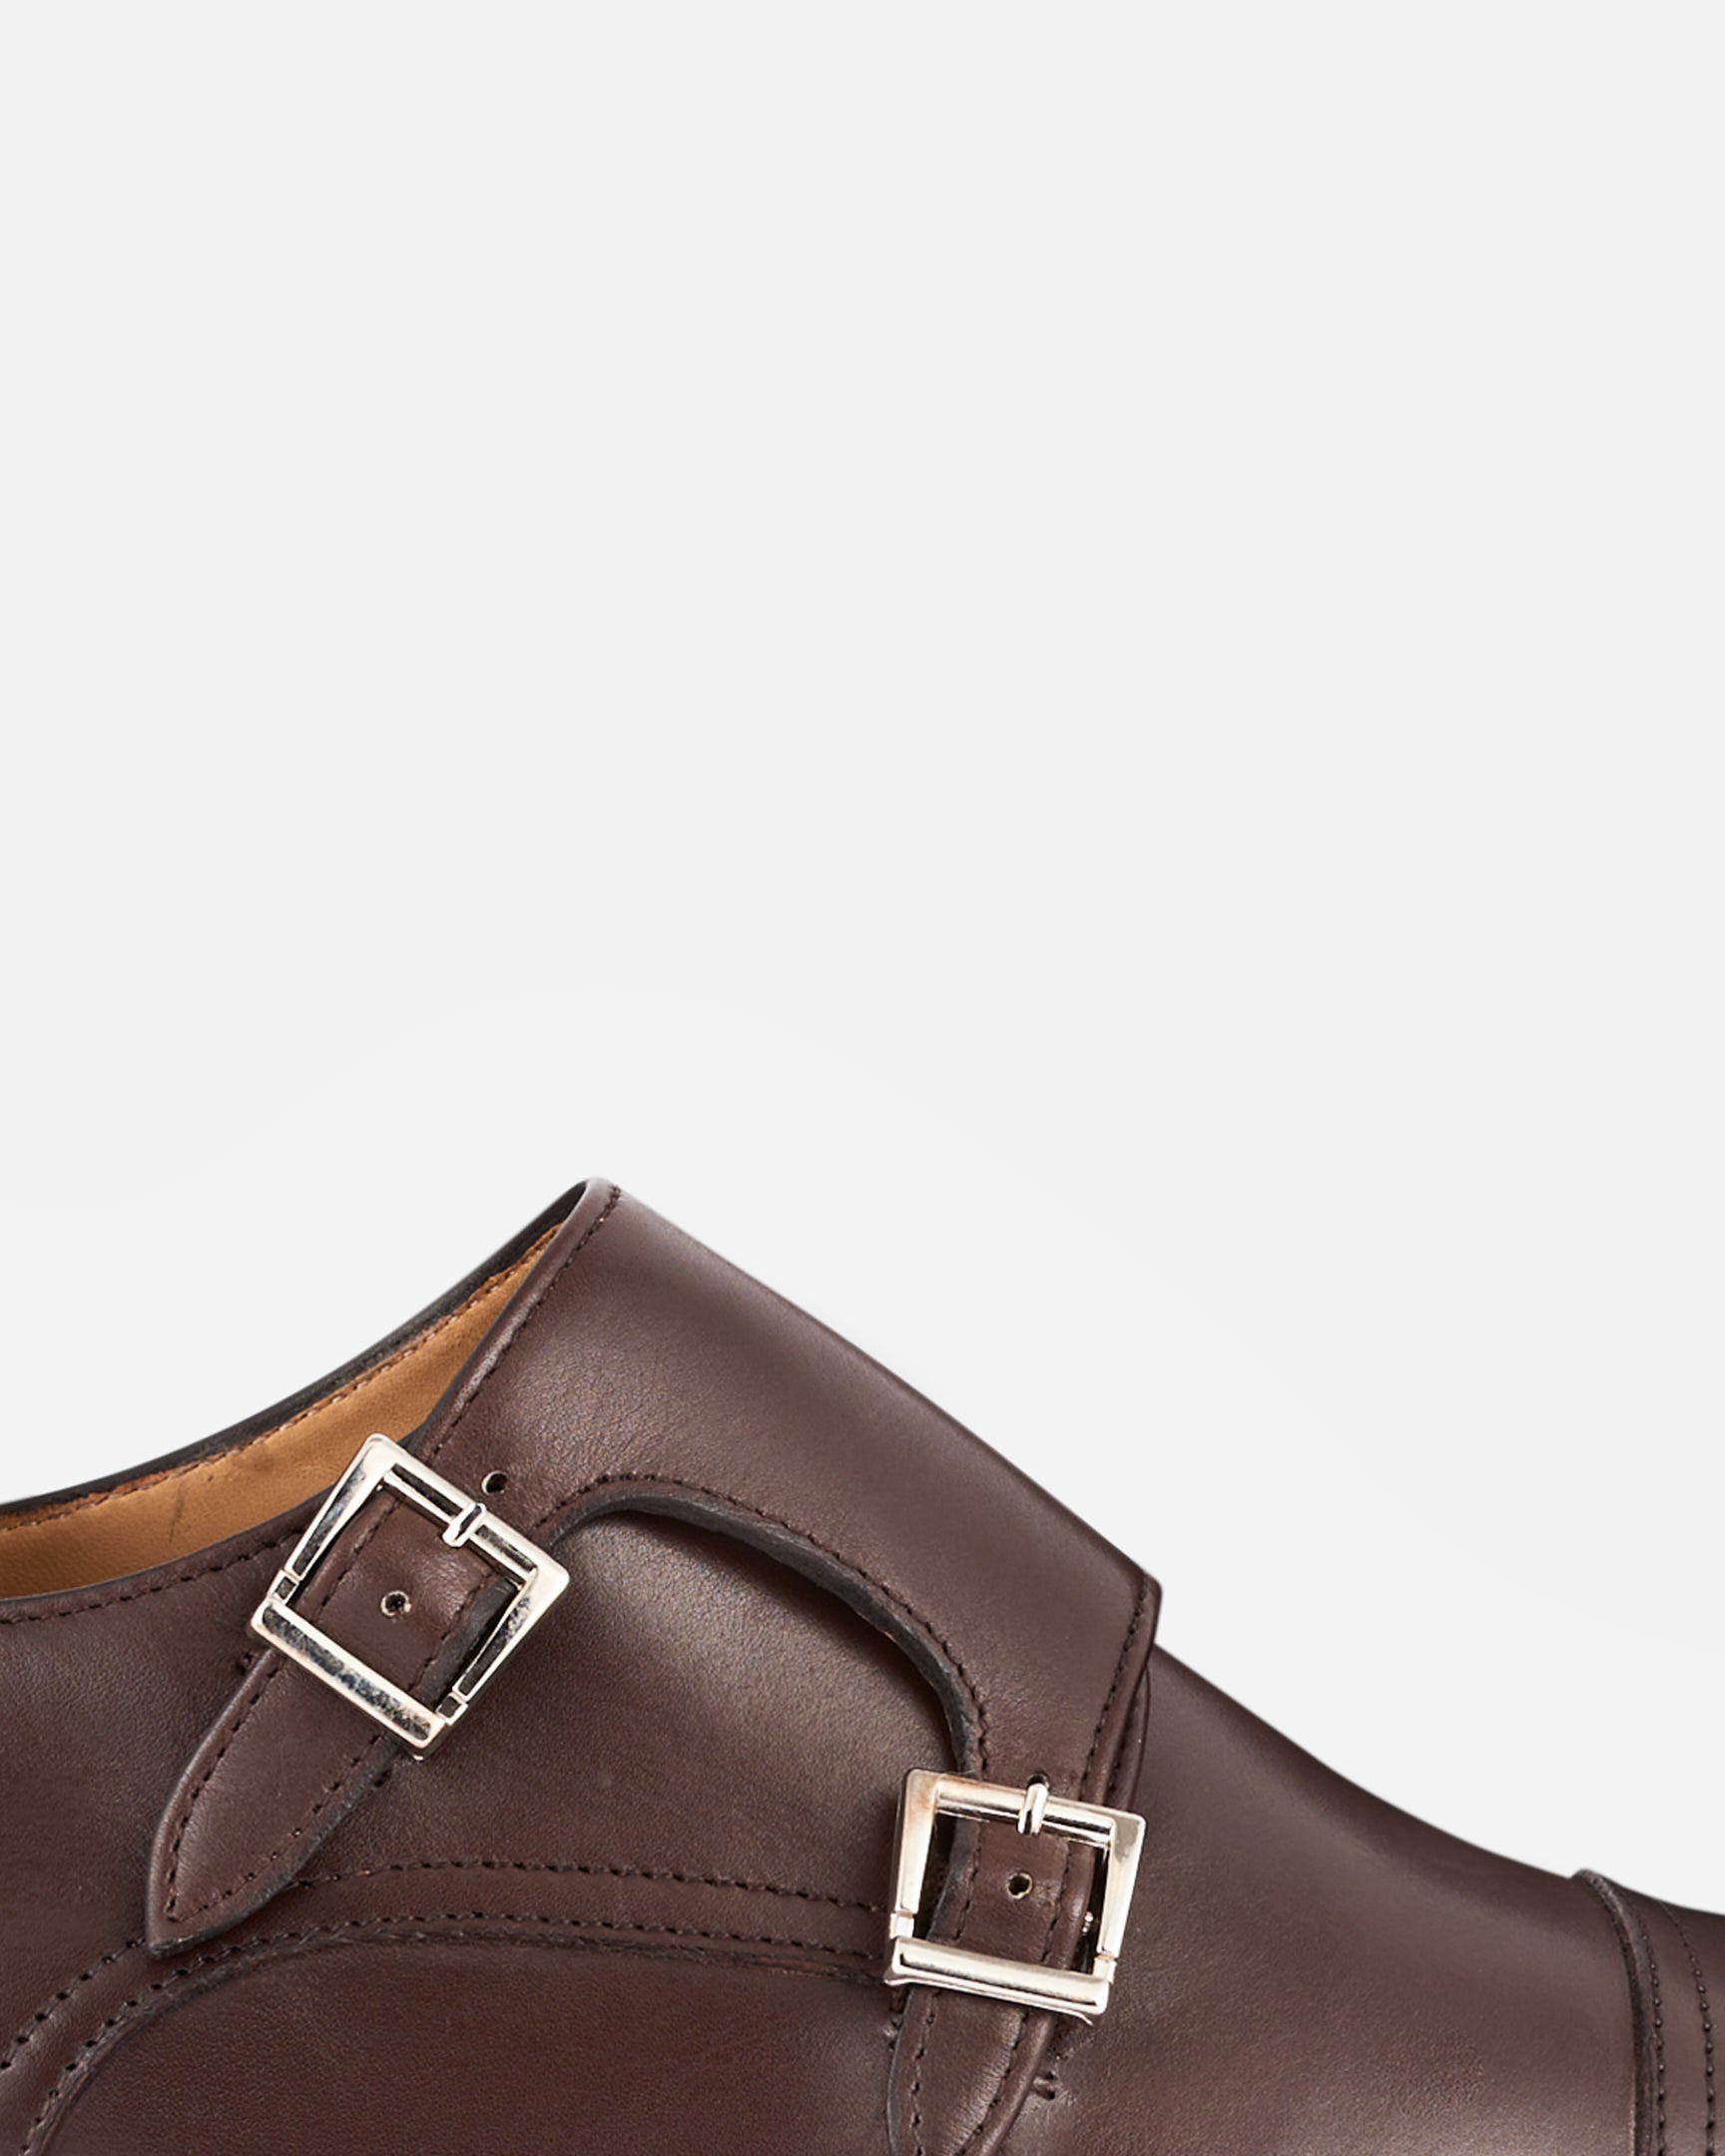 Madrid Calf Chateaubriand Brown 